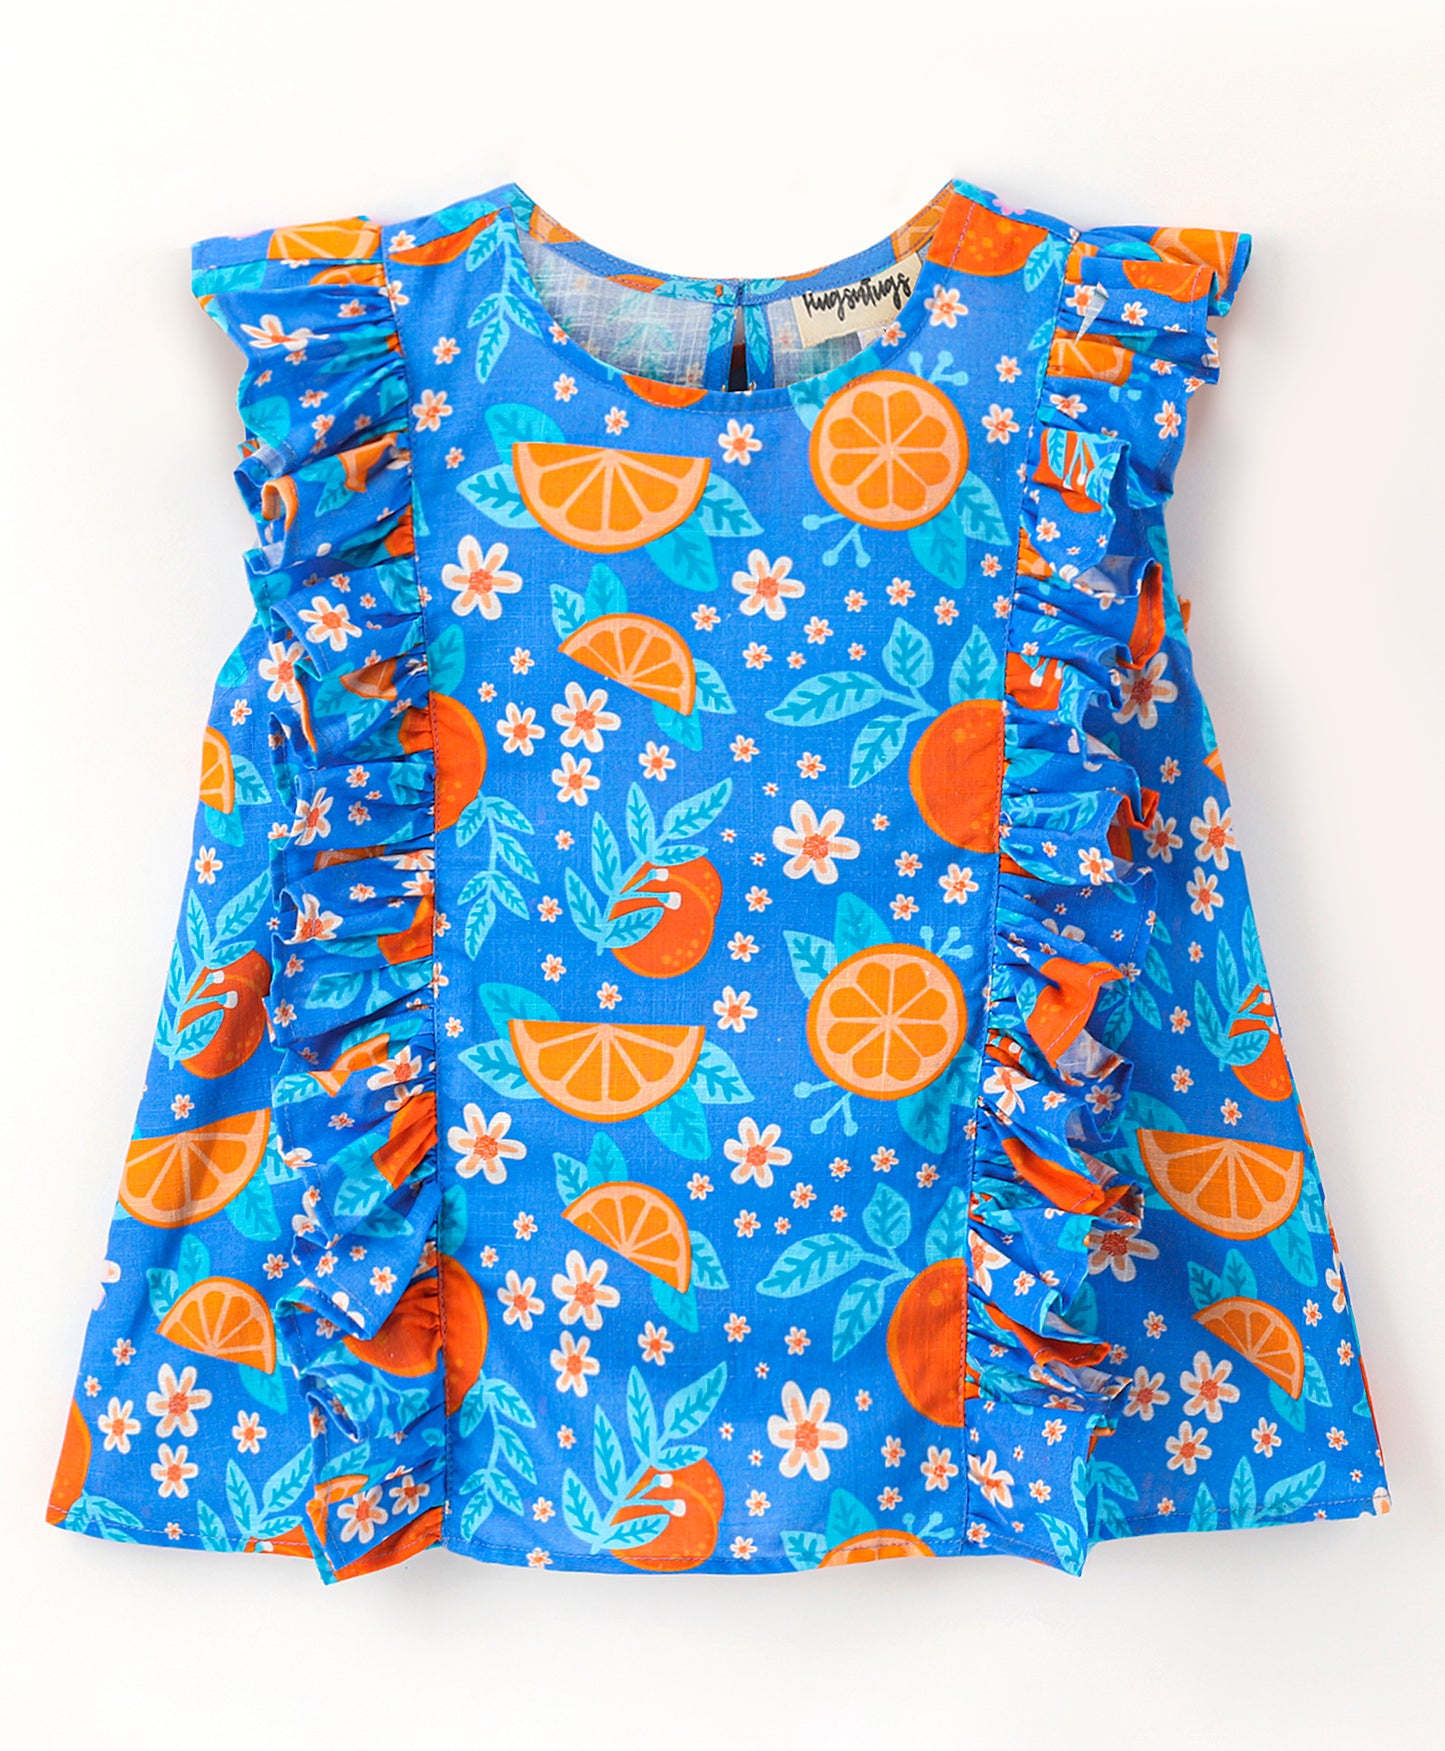 Blue fruit print top with frills along front side